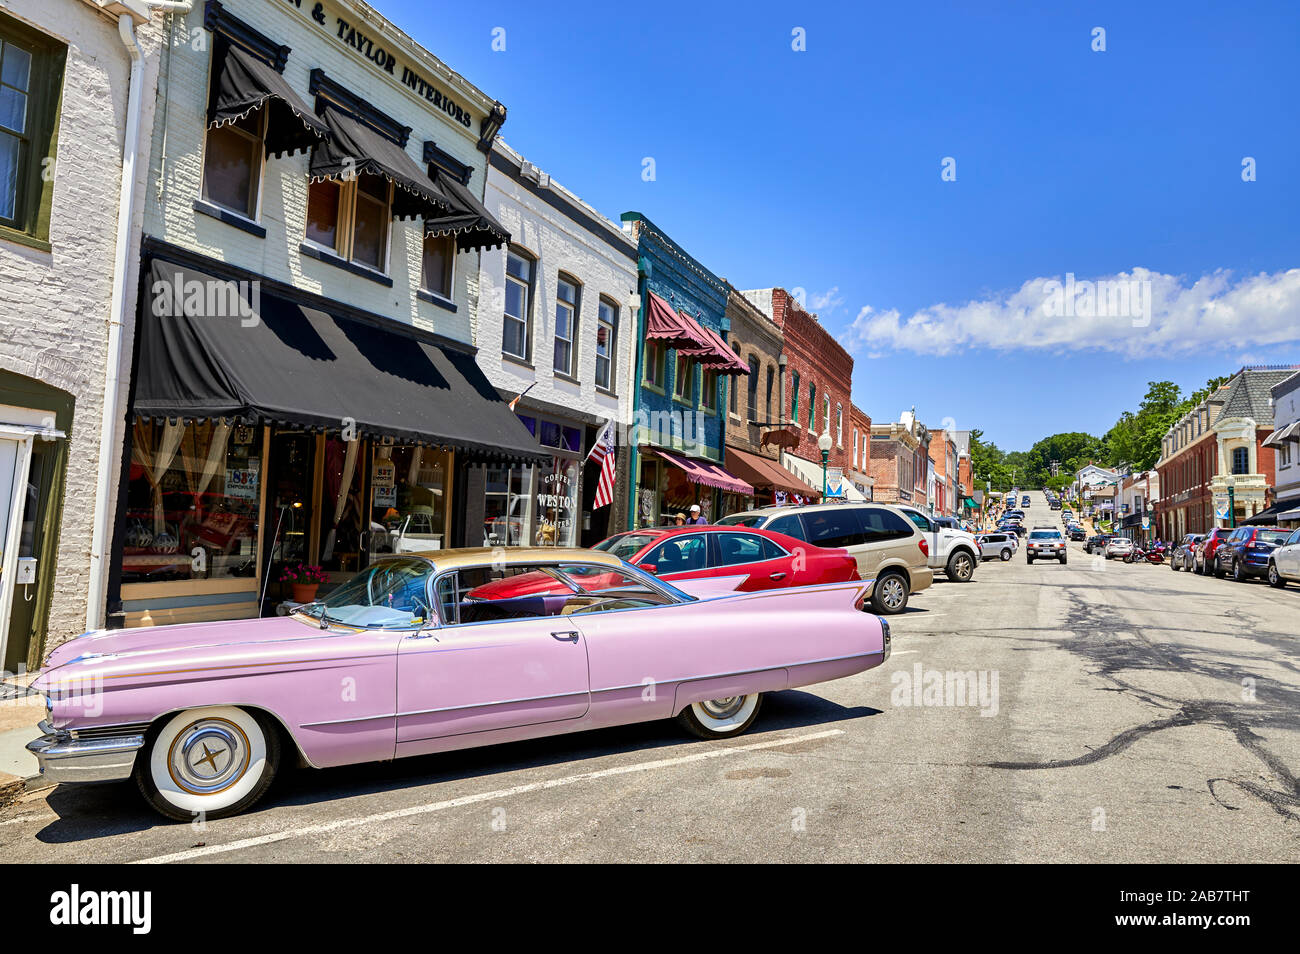 A pink 60s Cadillac in the historic old town of Weston, Missouri, North America Stock Photo